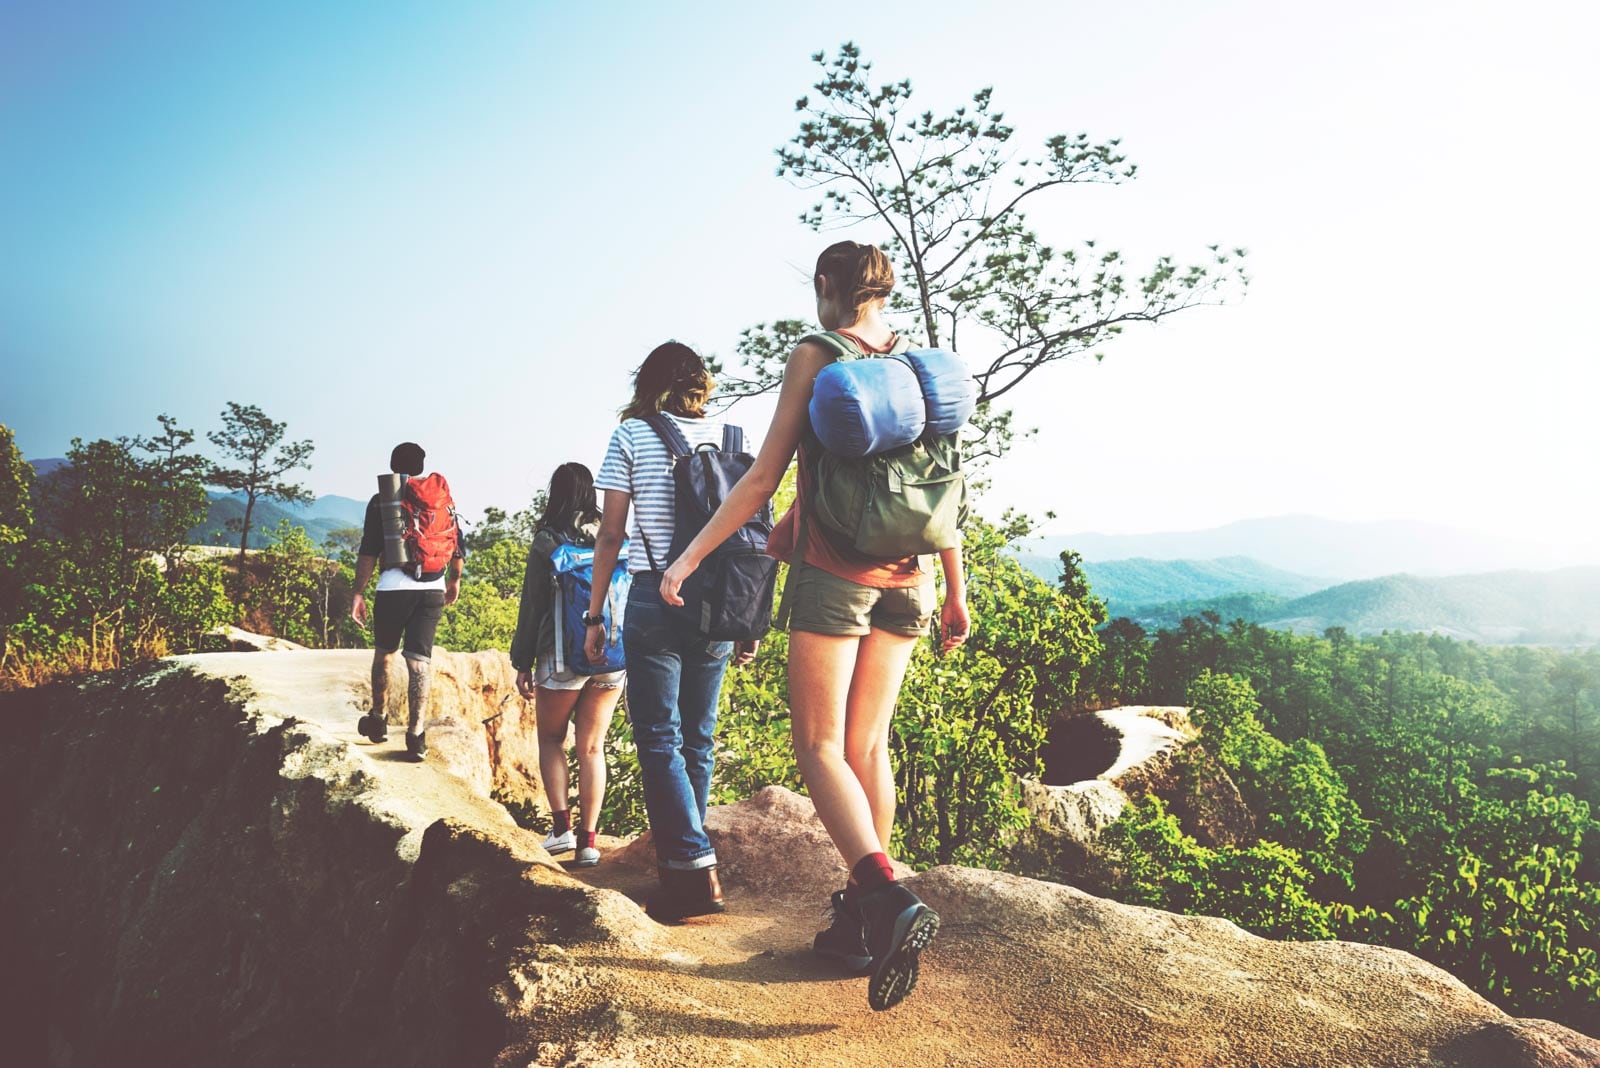 A group of people hiking with backpacks on a rocky cliff.